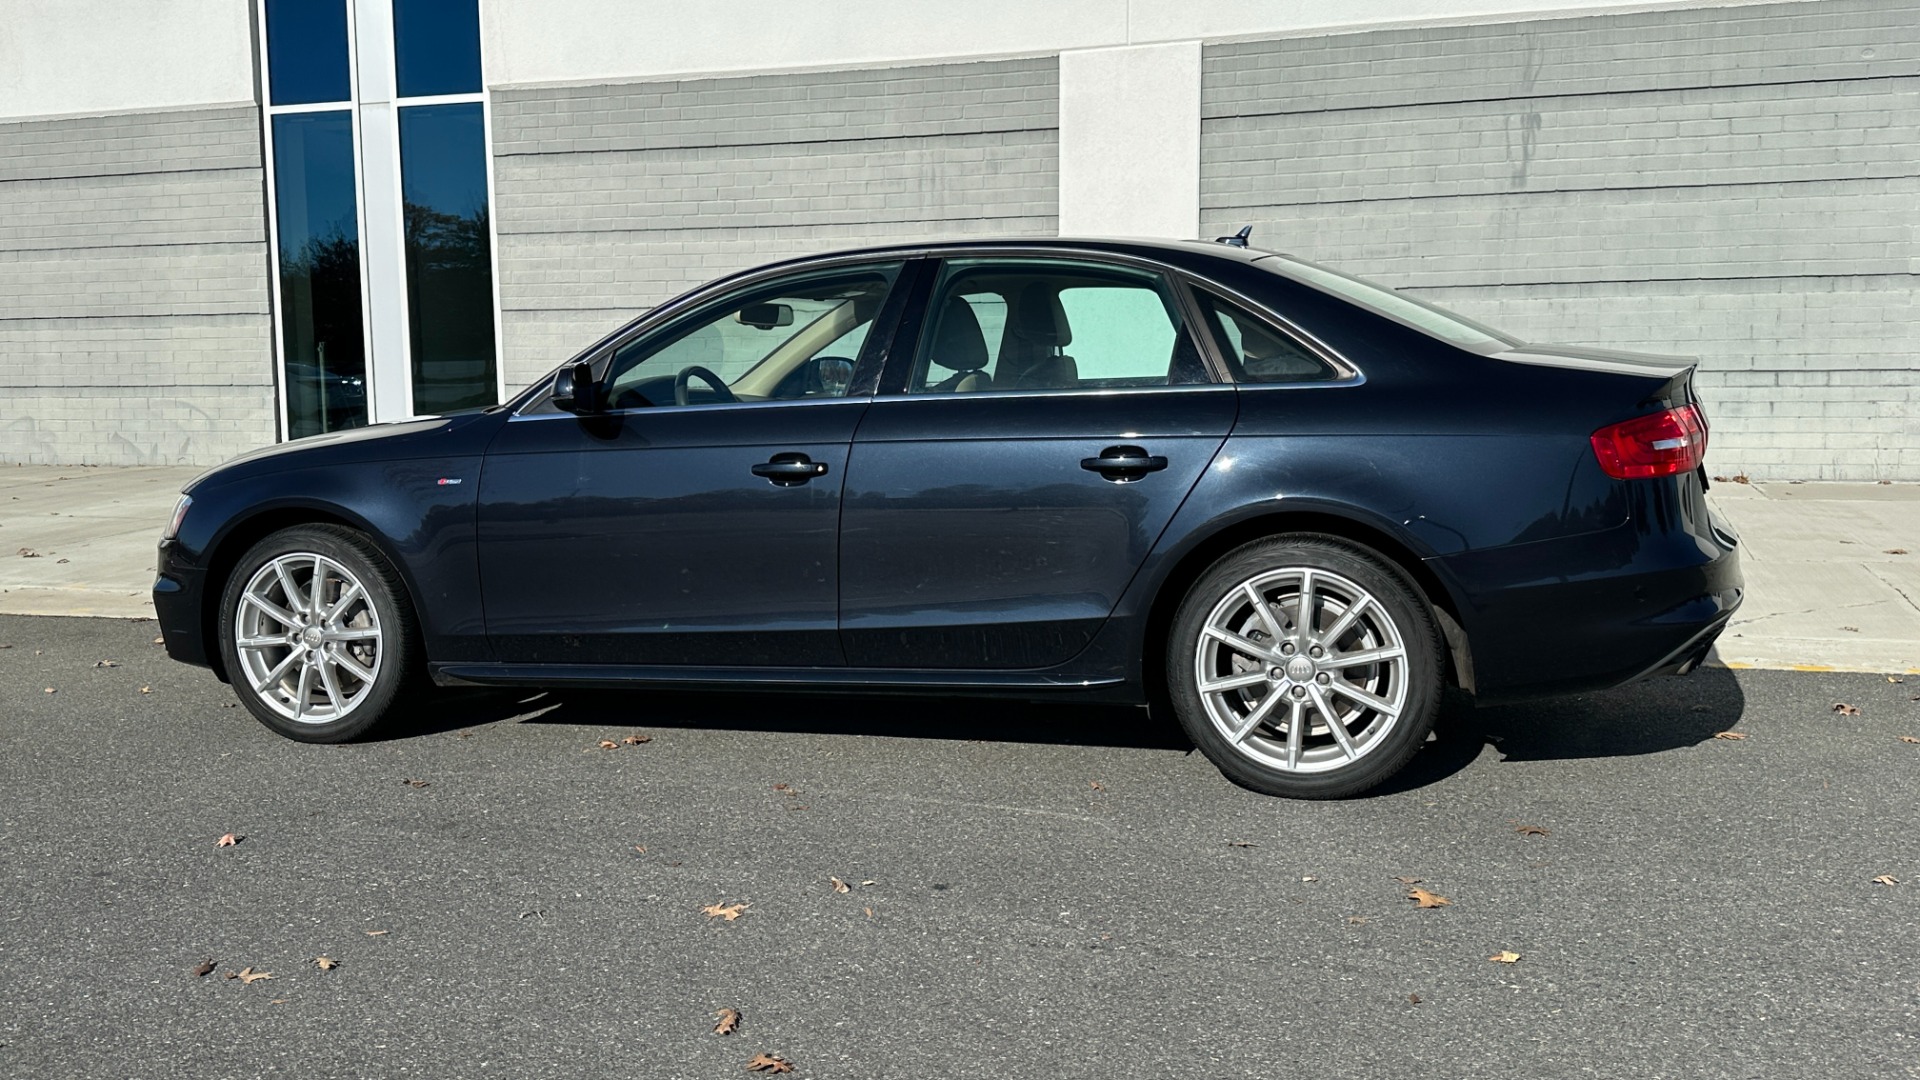 Used 2014 Audi A4 PREMIUM PLUS / NAVIGATION PLUS / BLINDSPOT ASSIST / LEATHER / SUNROOF for sale $21,900 at Formula Imports in Charlotte NC 28227 3